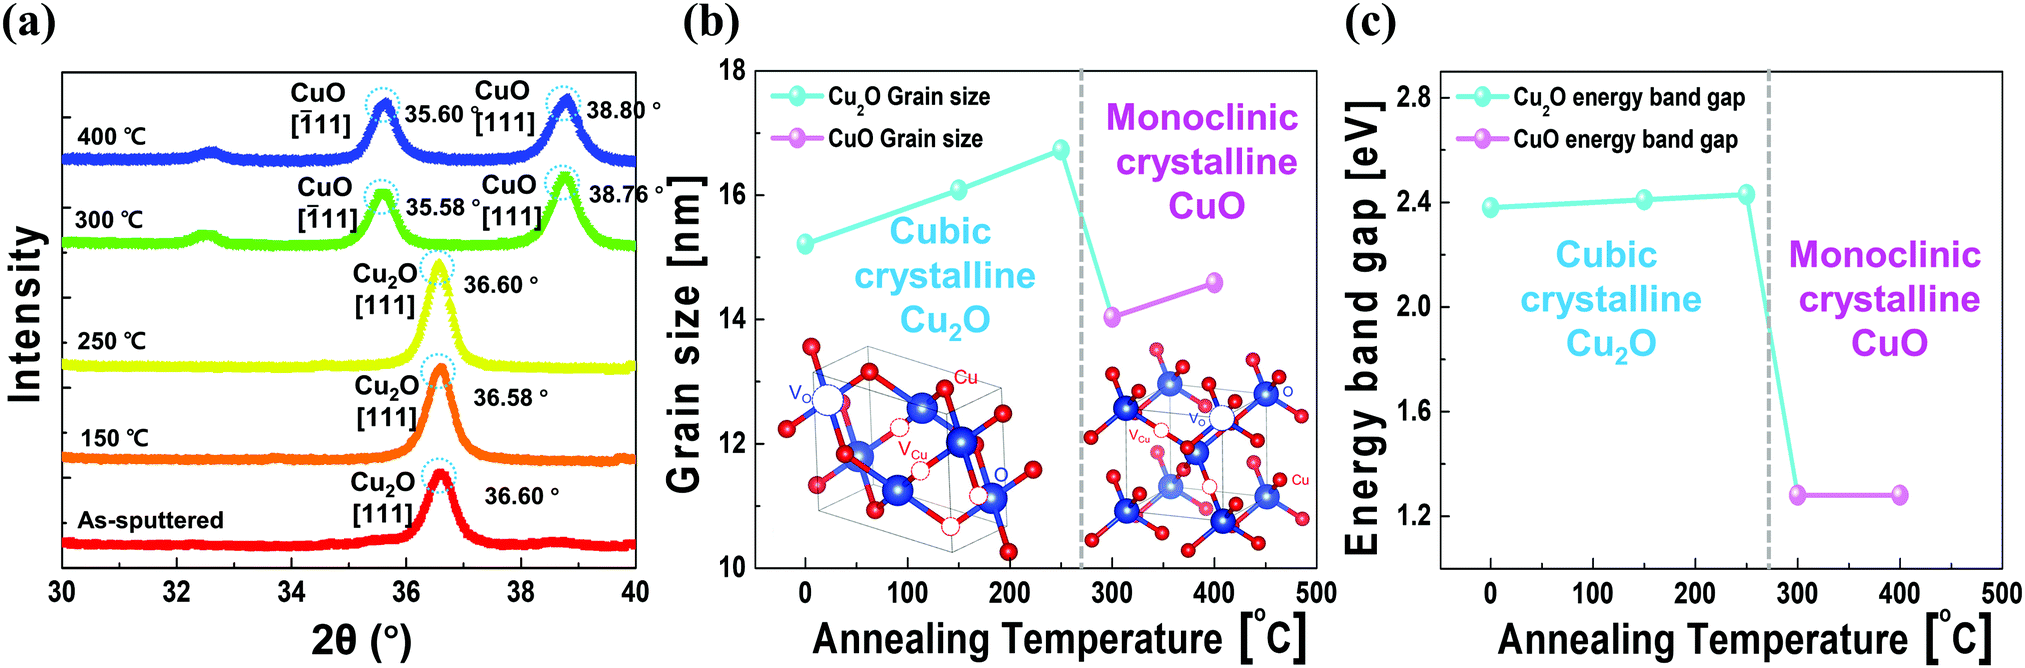 An Electroforming Free Mechanism For Cu2o Solid Electrolyte Based Conductive Bridge Random Access Memory Cbram Journal Of Materials Chemistry C Rsc Publishing